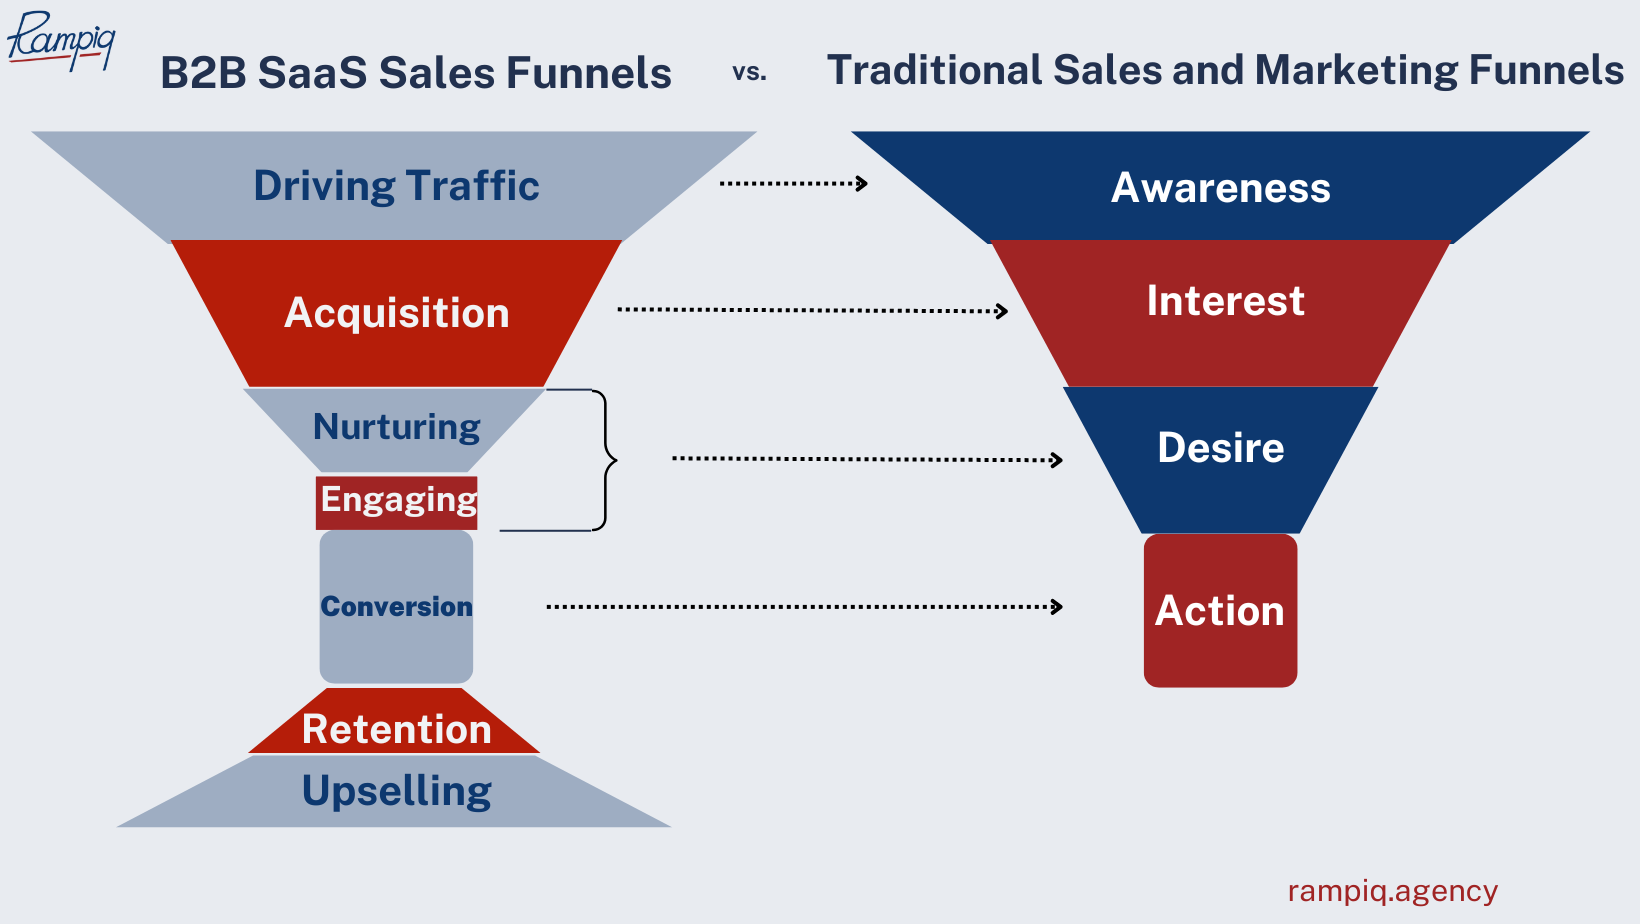 B2B SaaS Sales Funnels vs Traditional Sales and Marketing Funnels